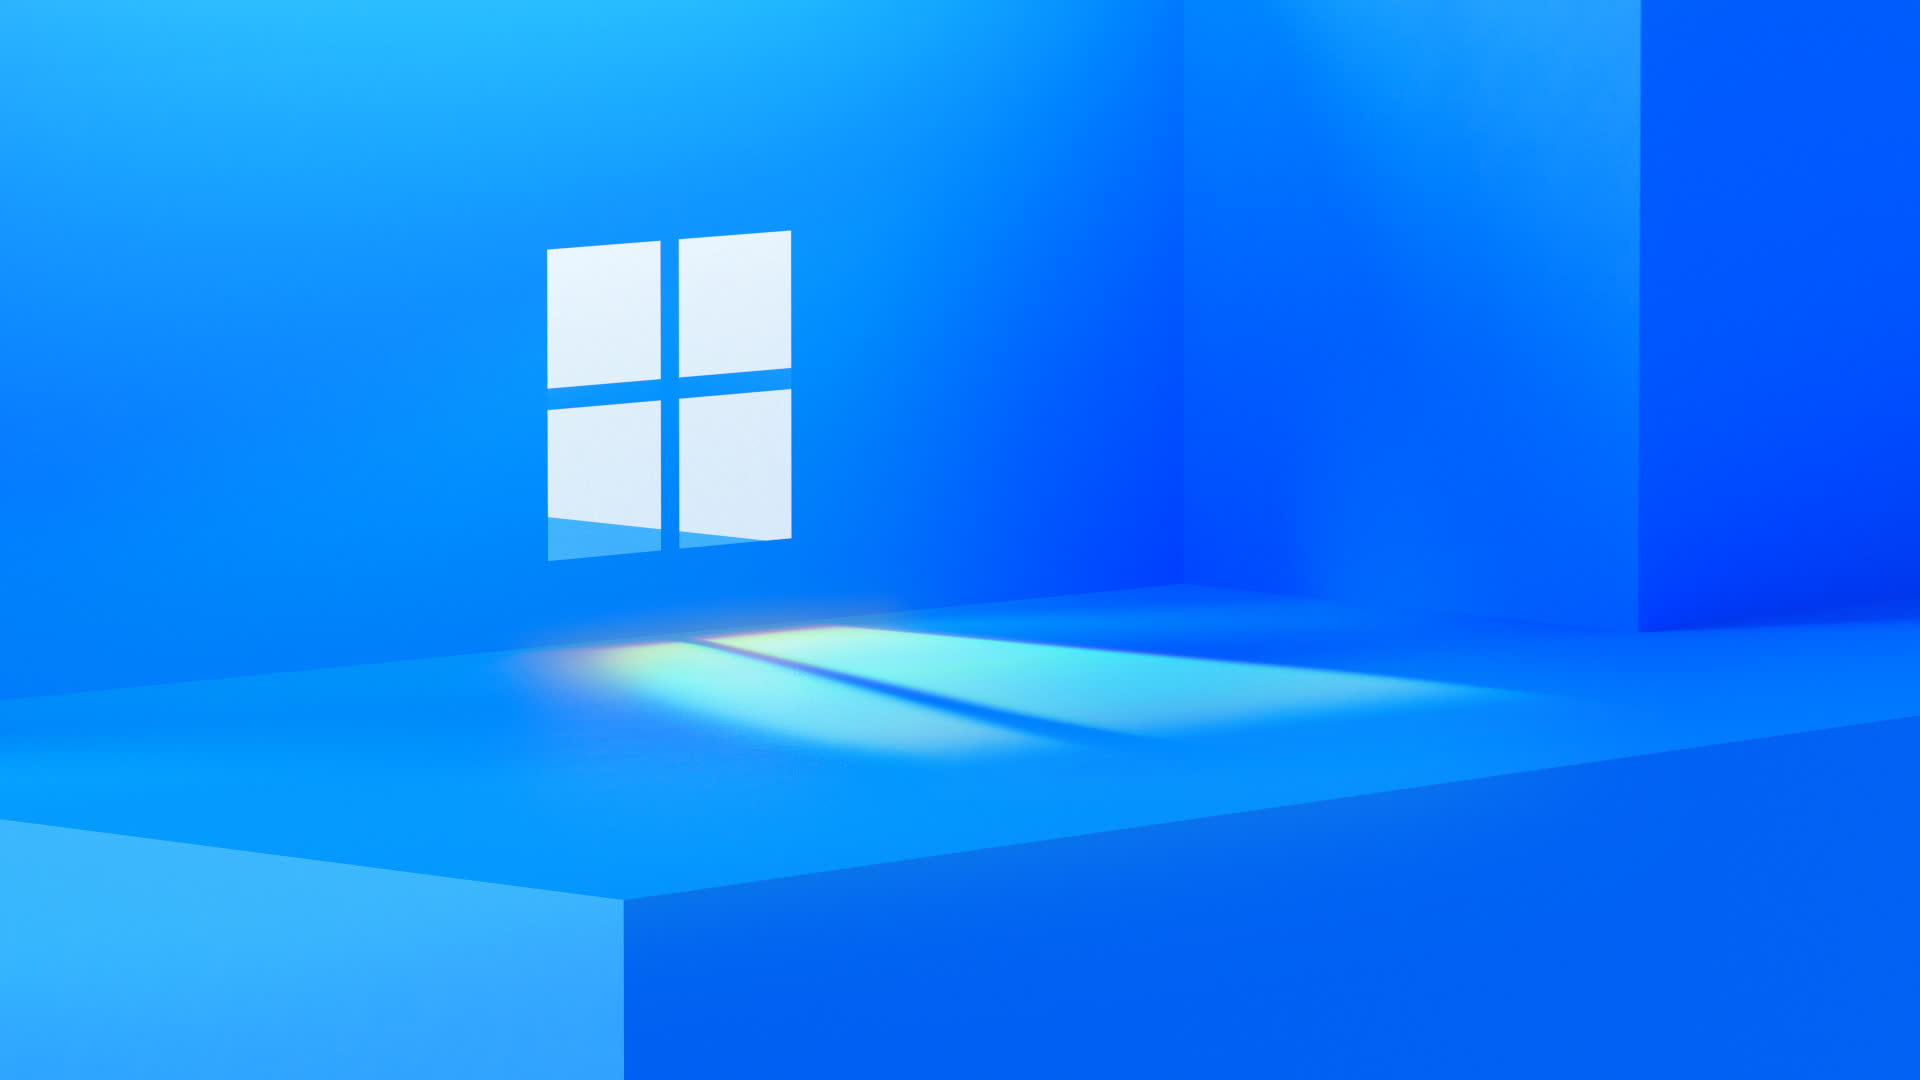 Microsoft is set to unveil what's next for Windows on June 24